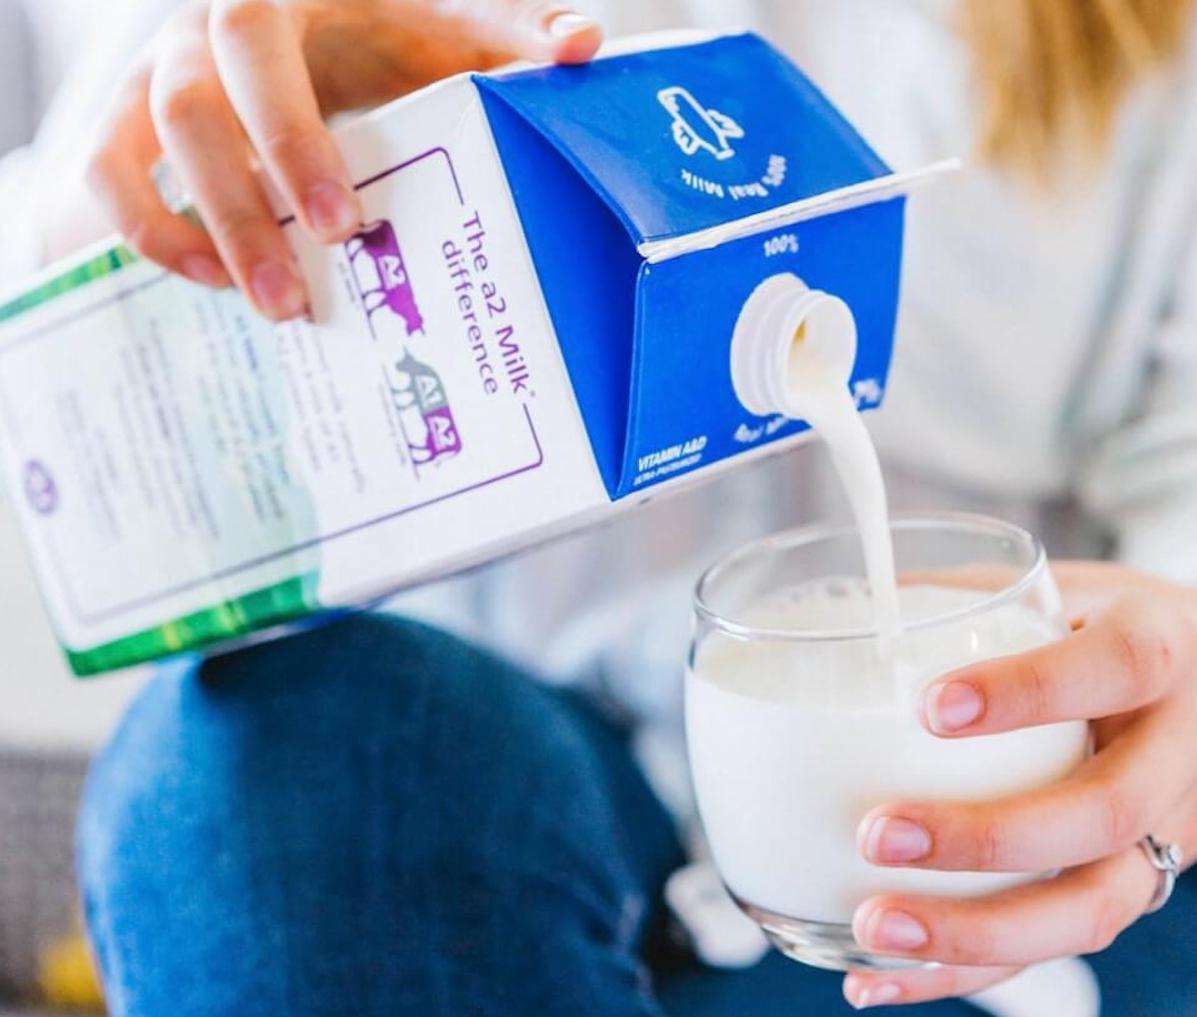 Everything You Need to Know About a2 Milk